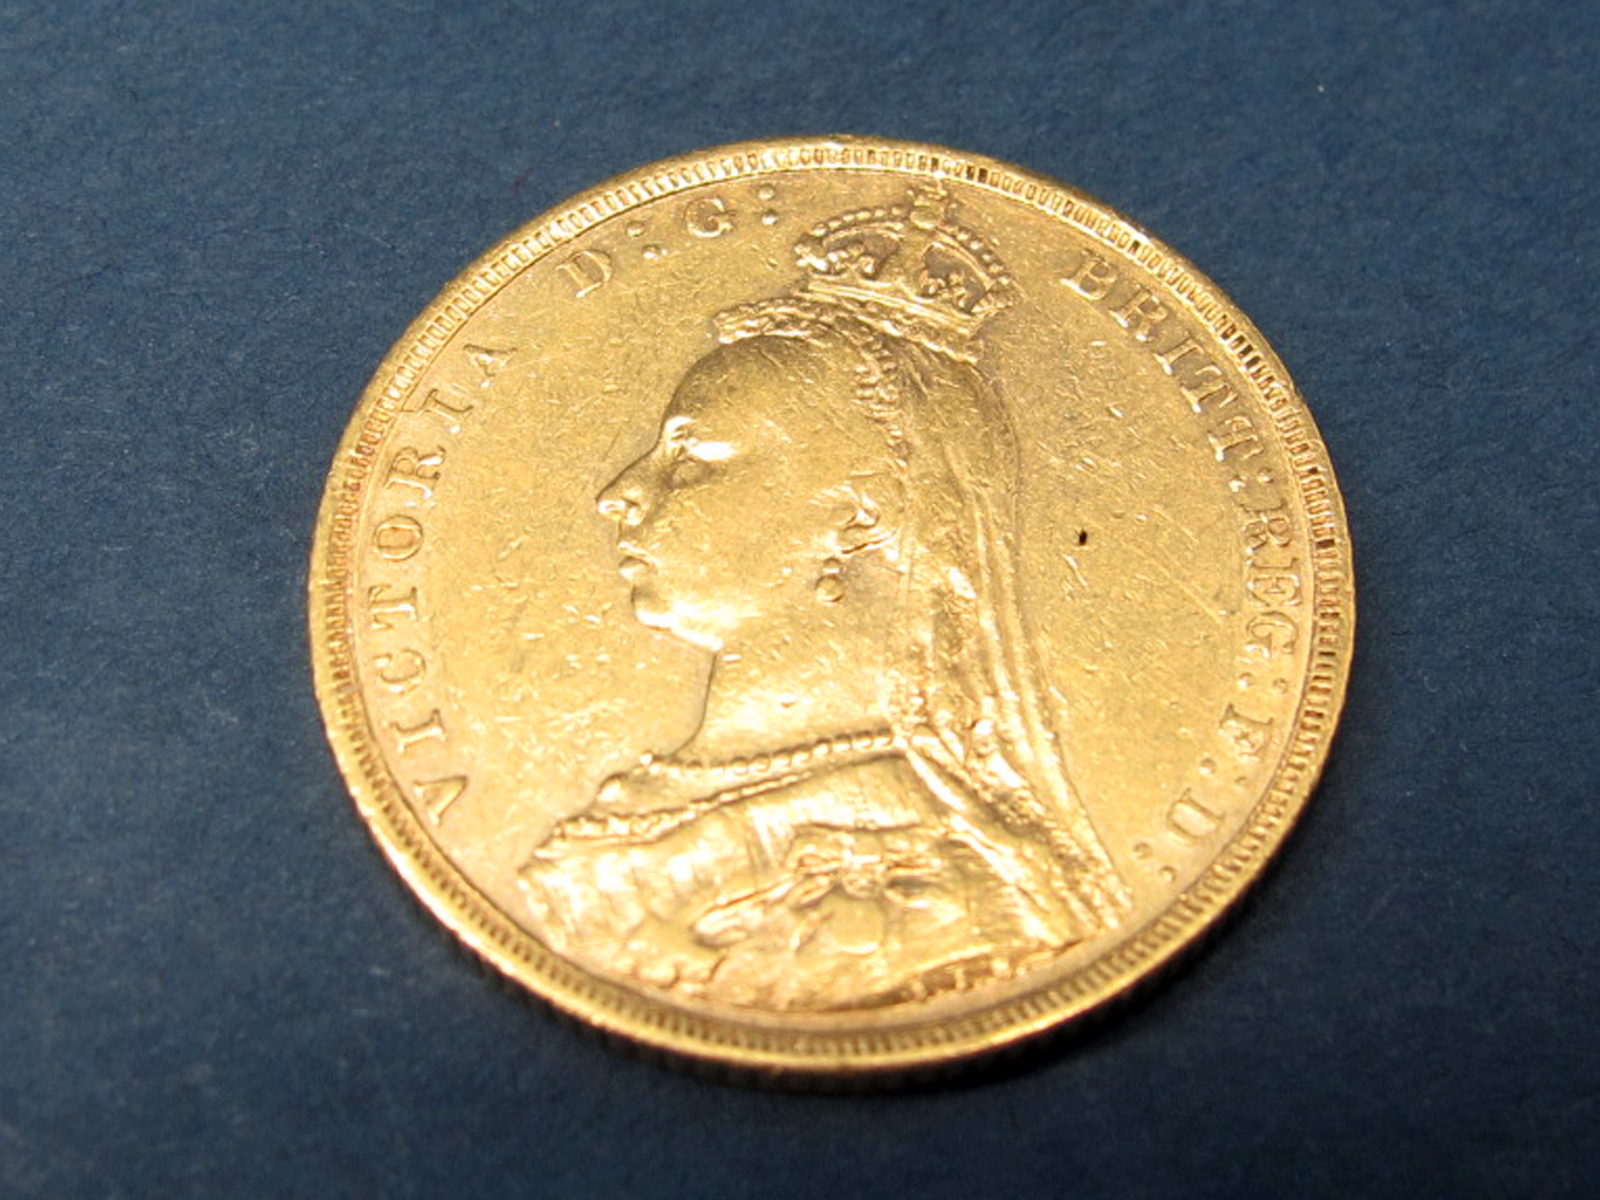 Queen Victoria Jubilee Head Gold Sovereign, 1889 'M', accompanied by Westminster C.O.A., (8.0g).